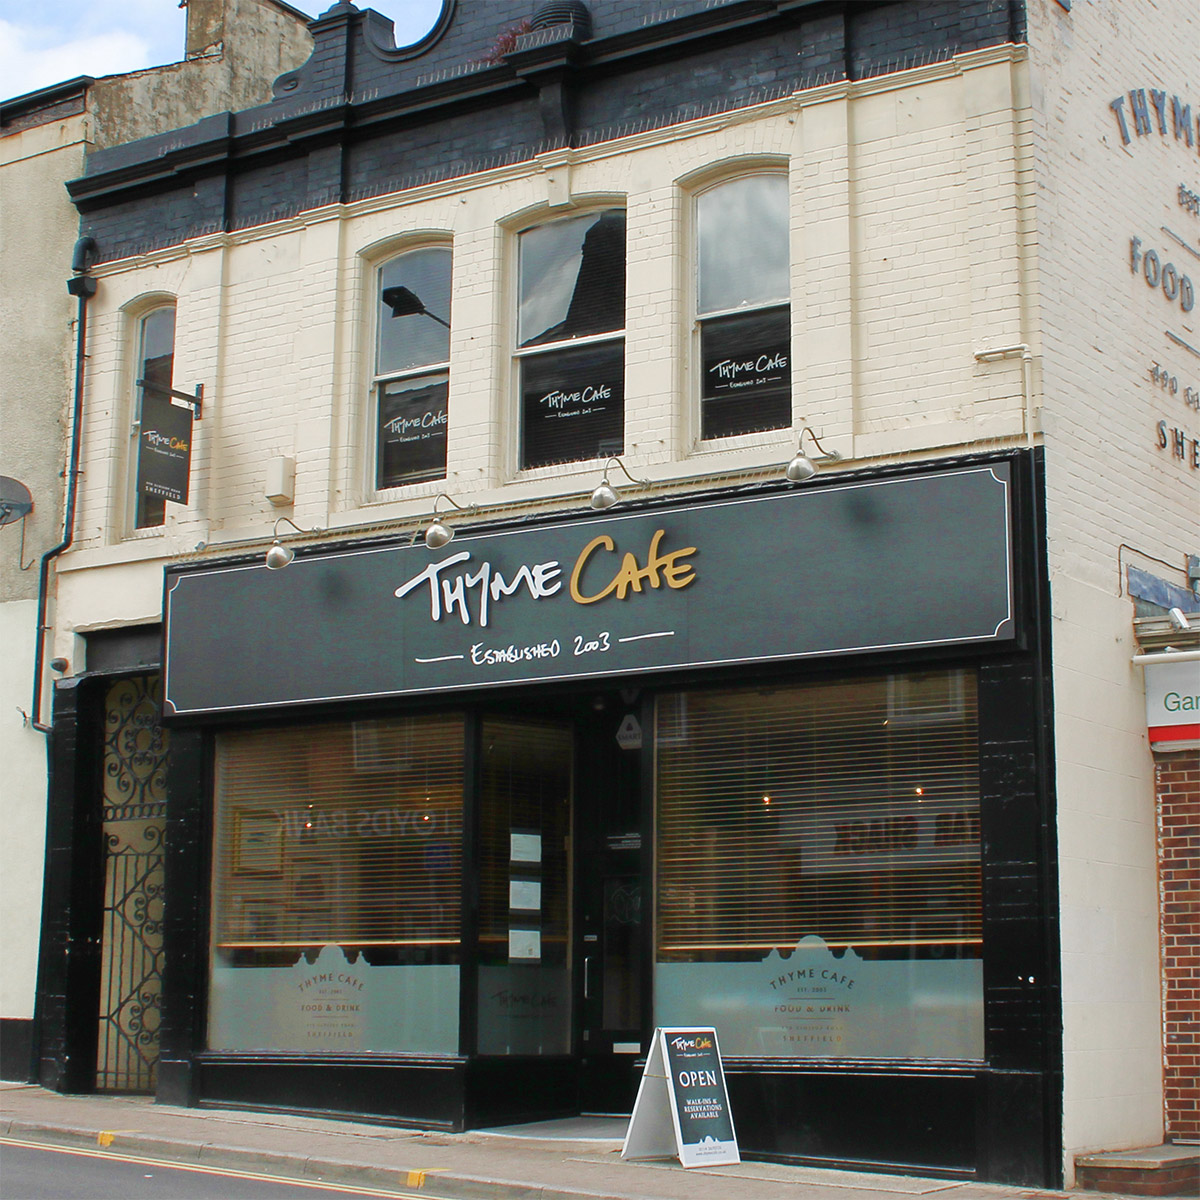 Thyme Cafe business sign Sheffield